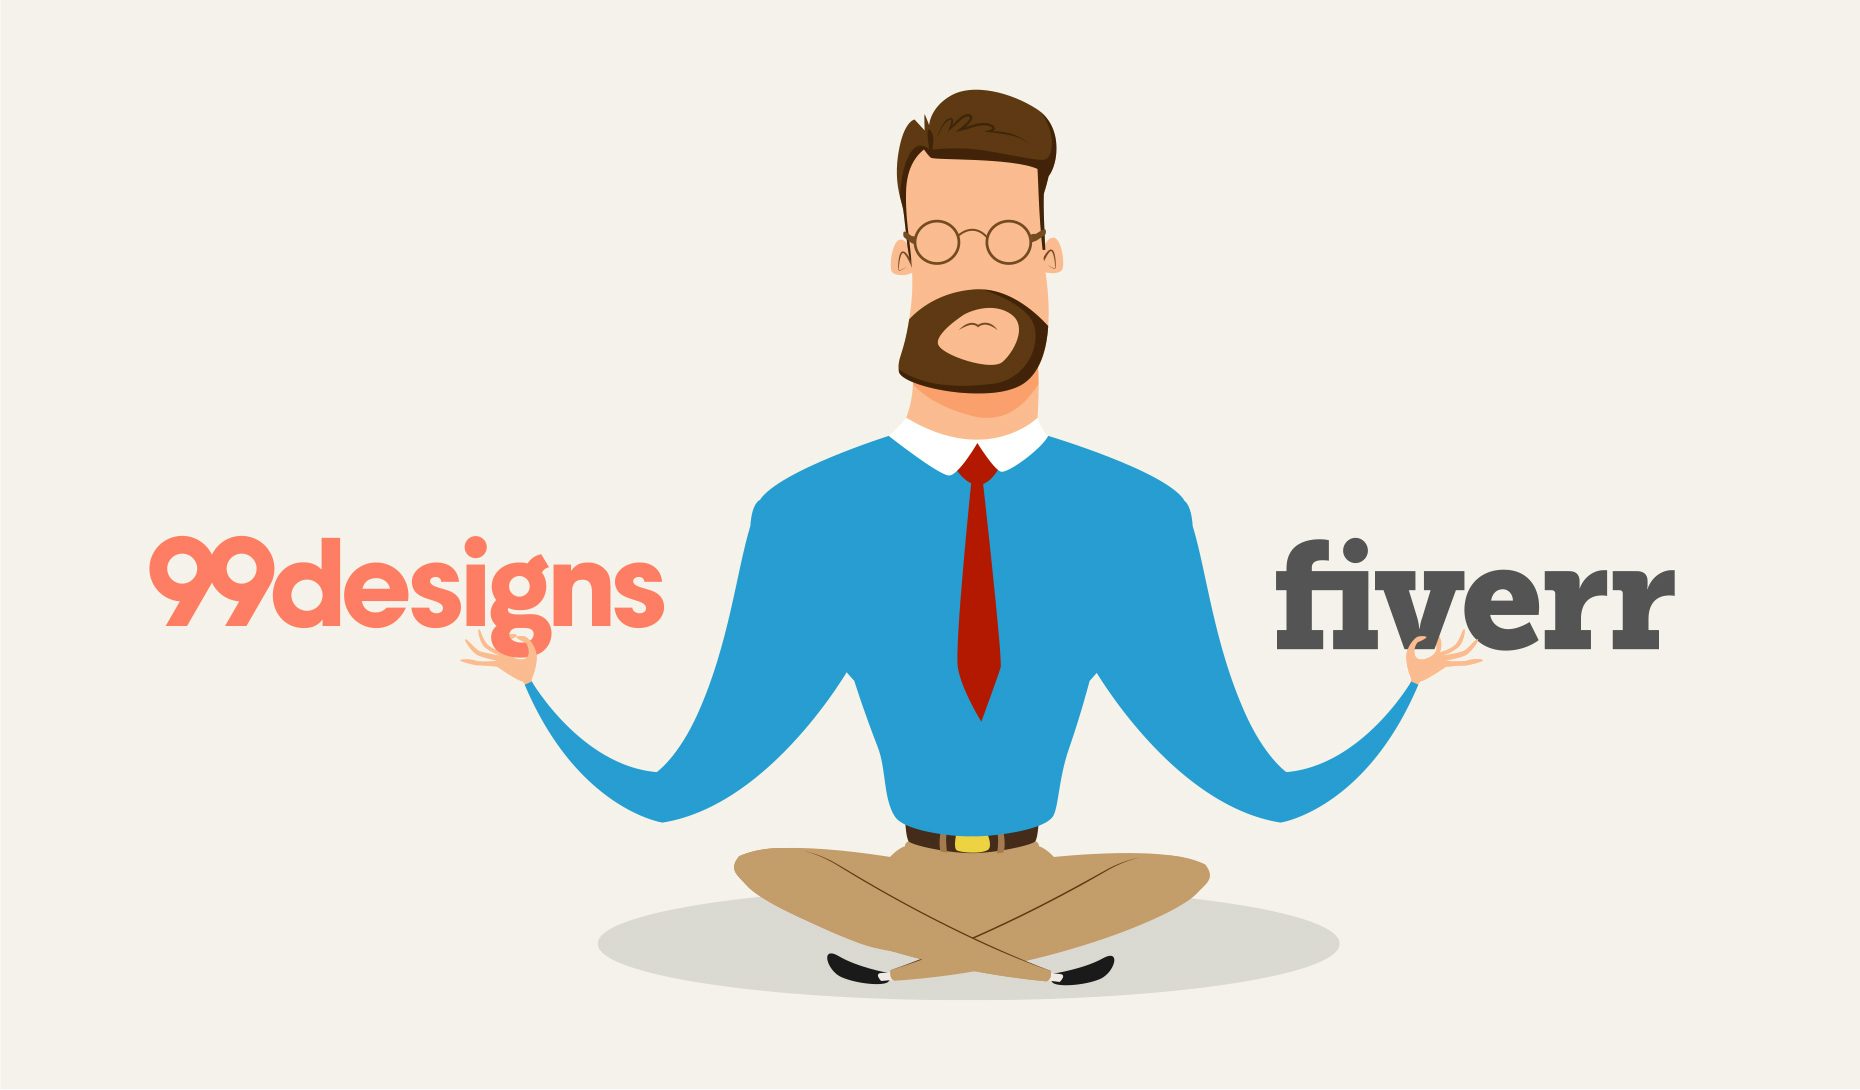 99designs Vs Fiverr Which Is The Best Choice For Graphic Design 99designs,Living Room Lower Middle Class Home Interior Design